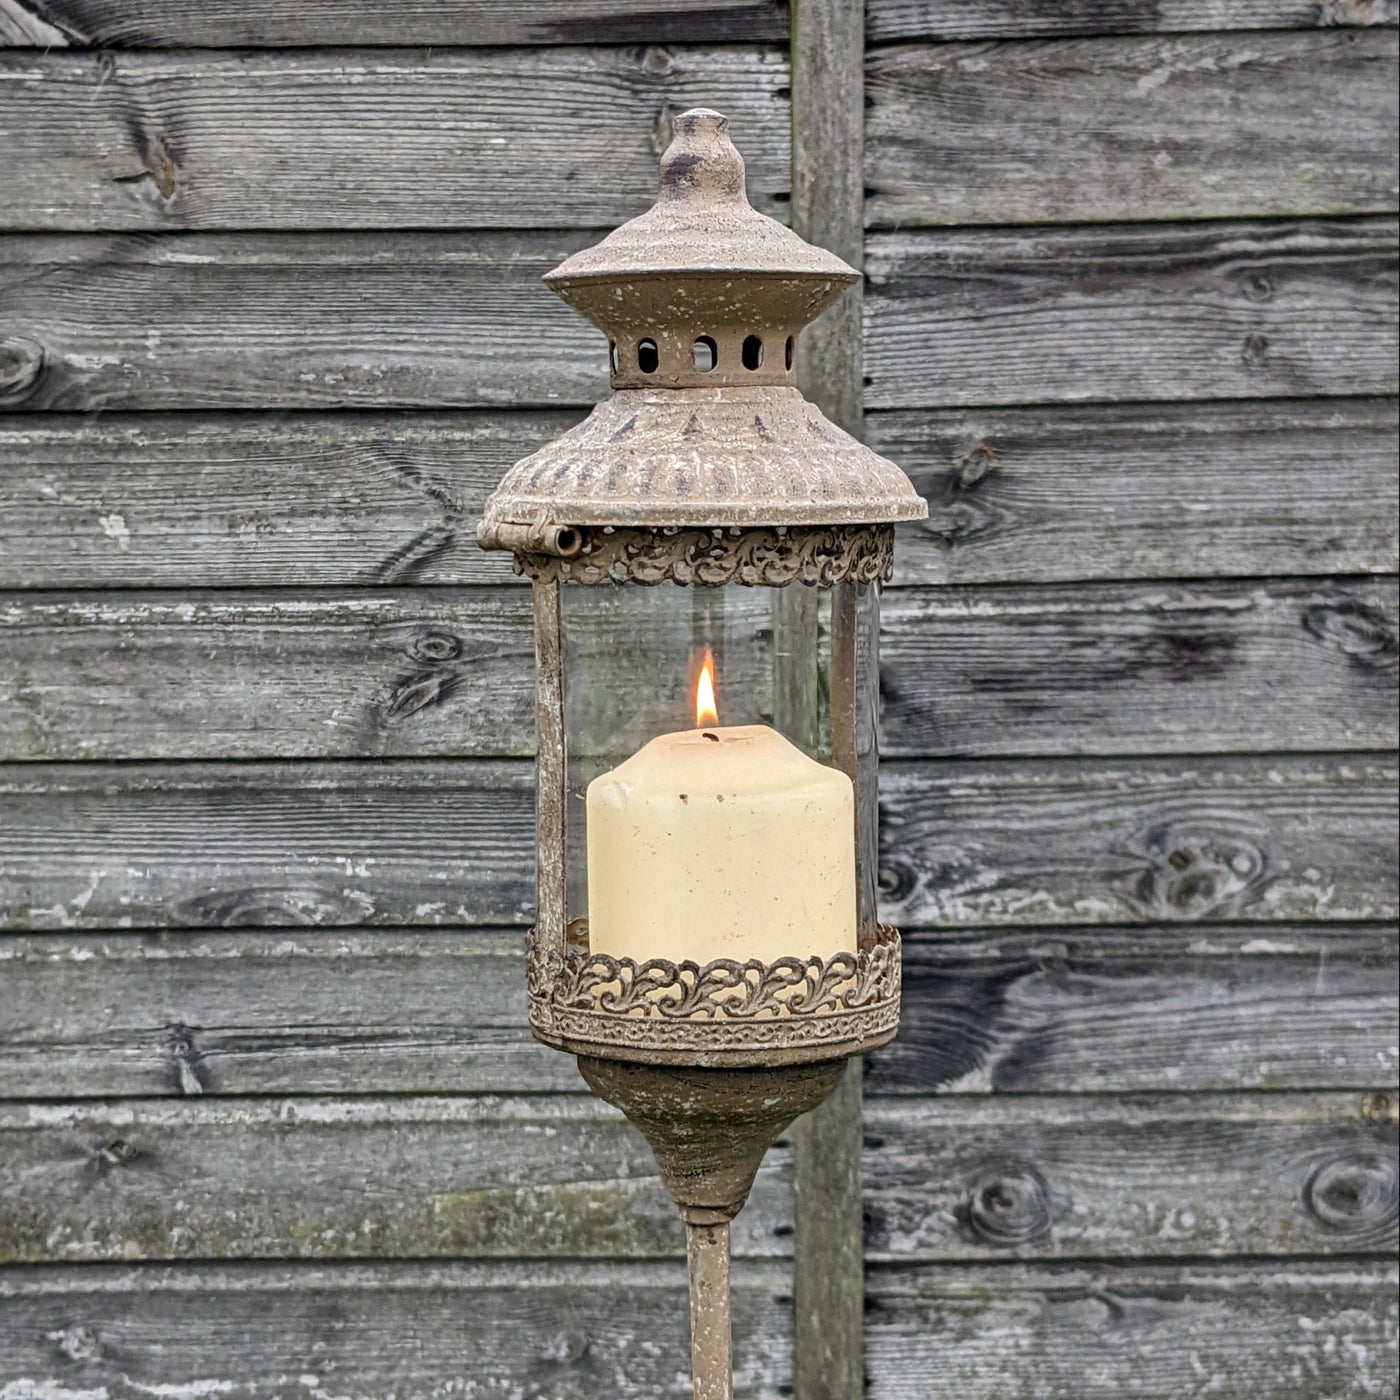 Large Metal Lantern On Tall Stake - LIVE LAUGH LOVE LIMITED